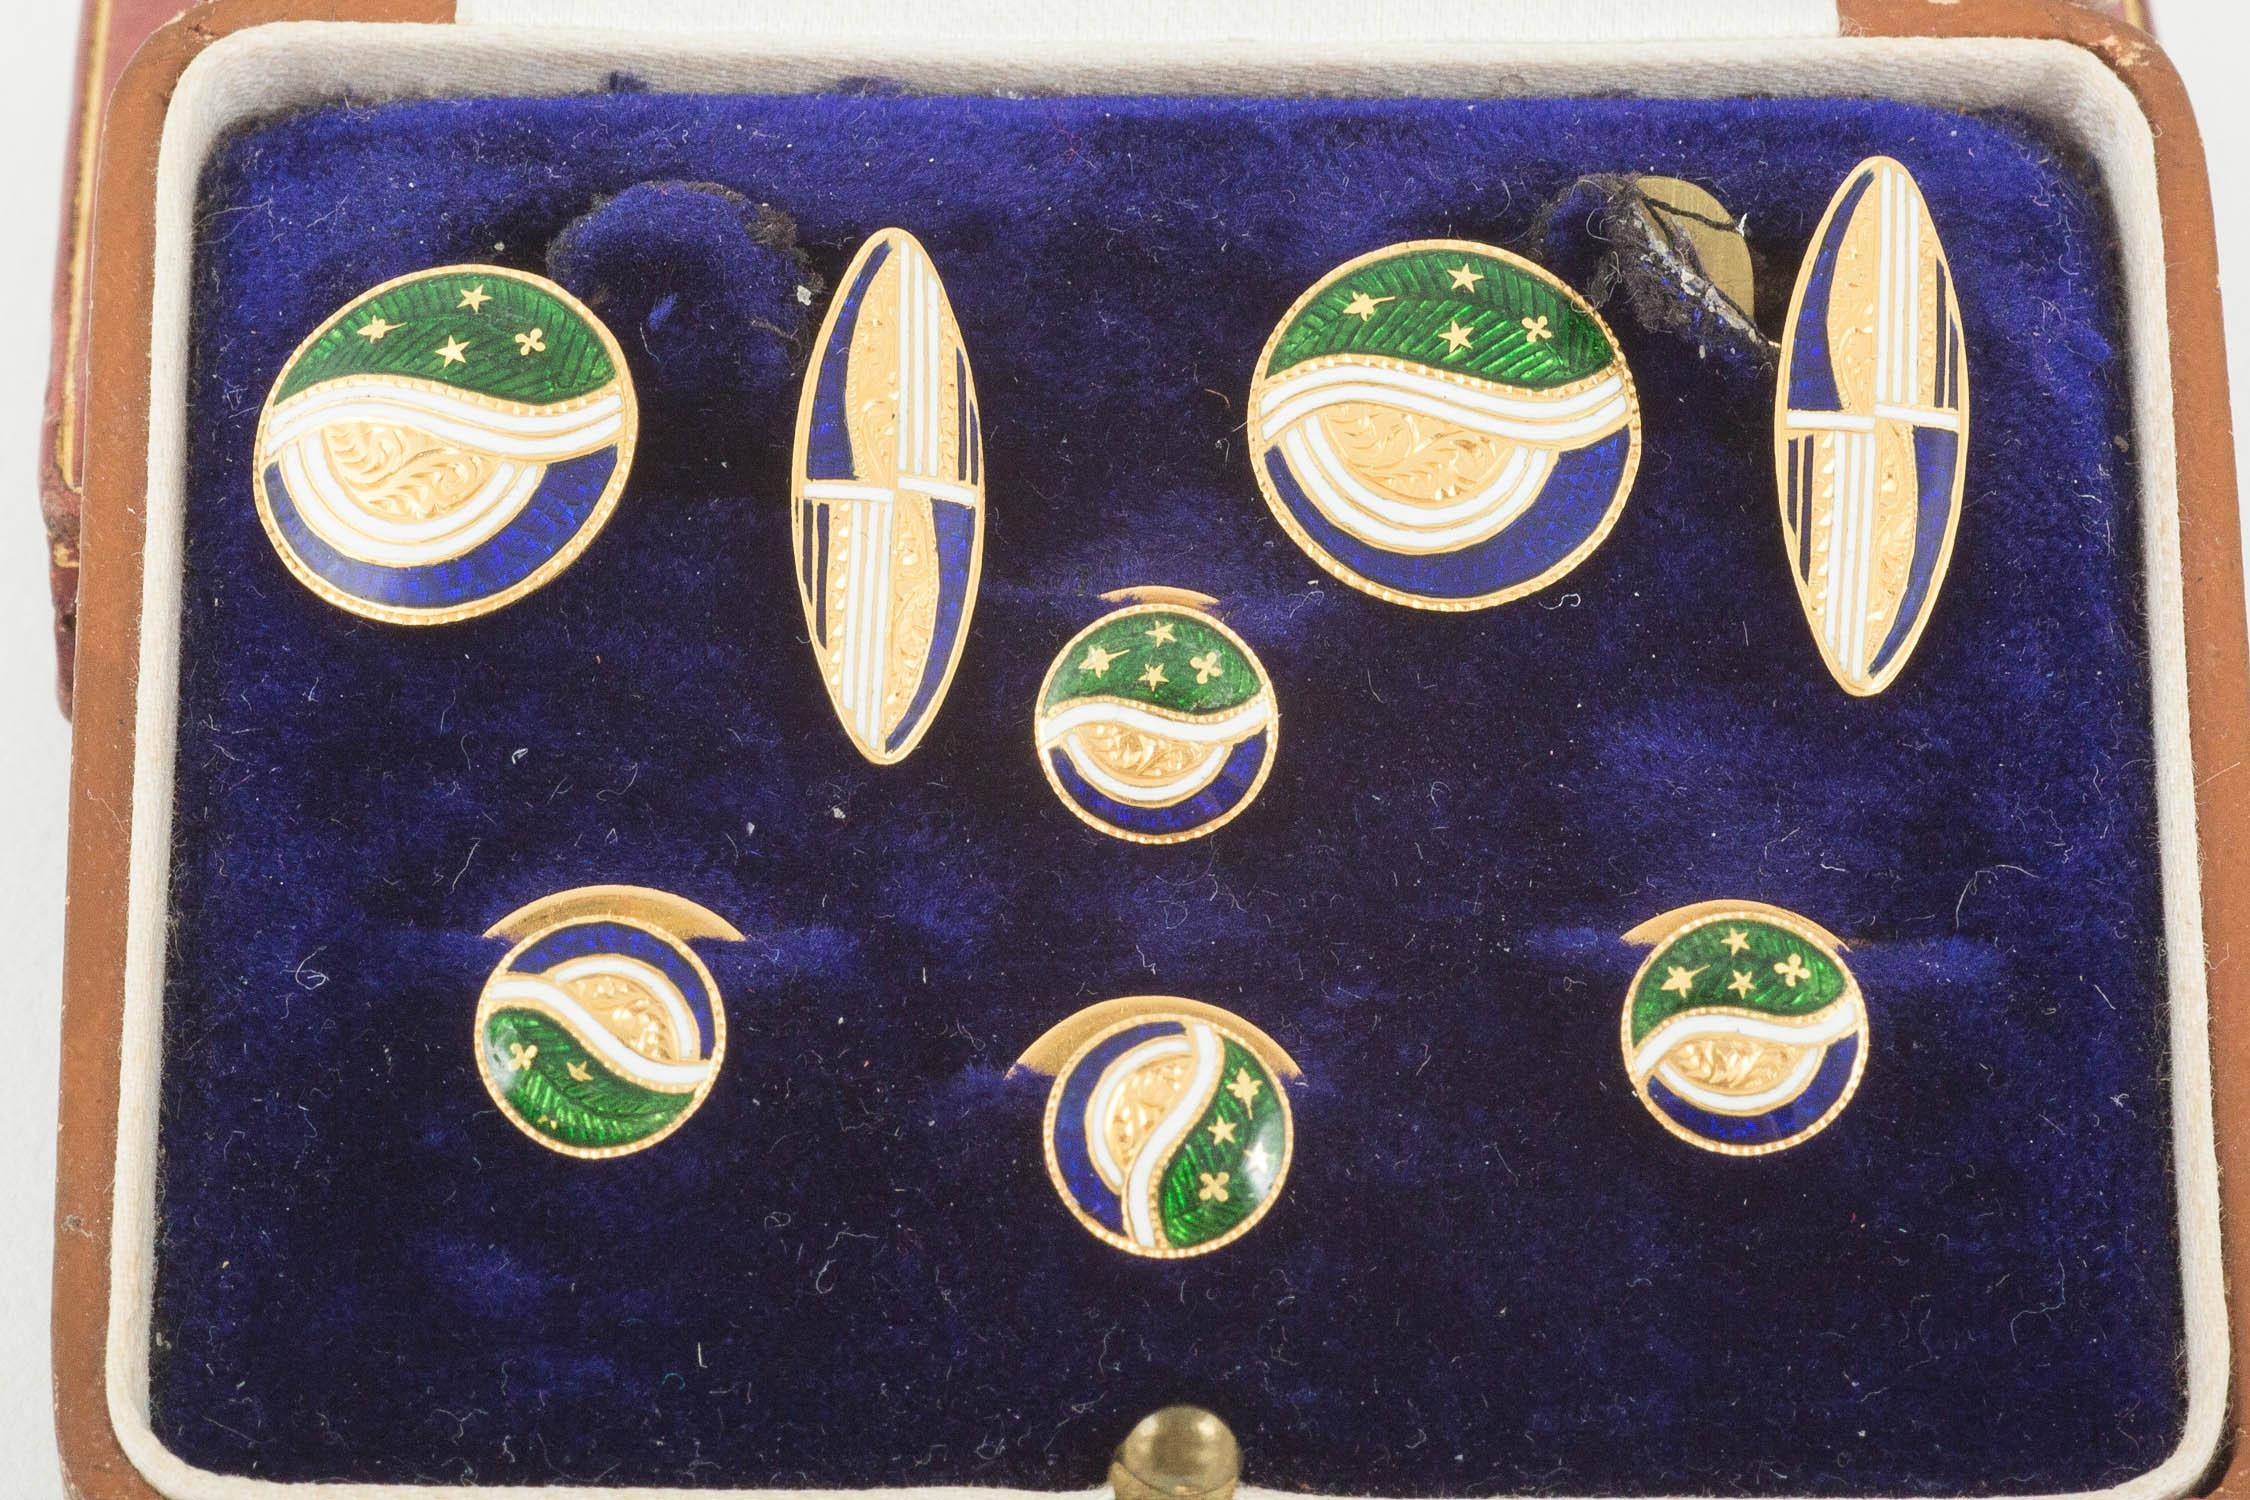 A pair of 14karat gold and brightly coloured blue,white and green enamel cufflinks and 4 matching studs decorated in swirls and stars in a fitted case.cufflinks 13 mm across the centre circular link,and 20 mm length in the boat shaped link. Marks